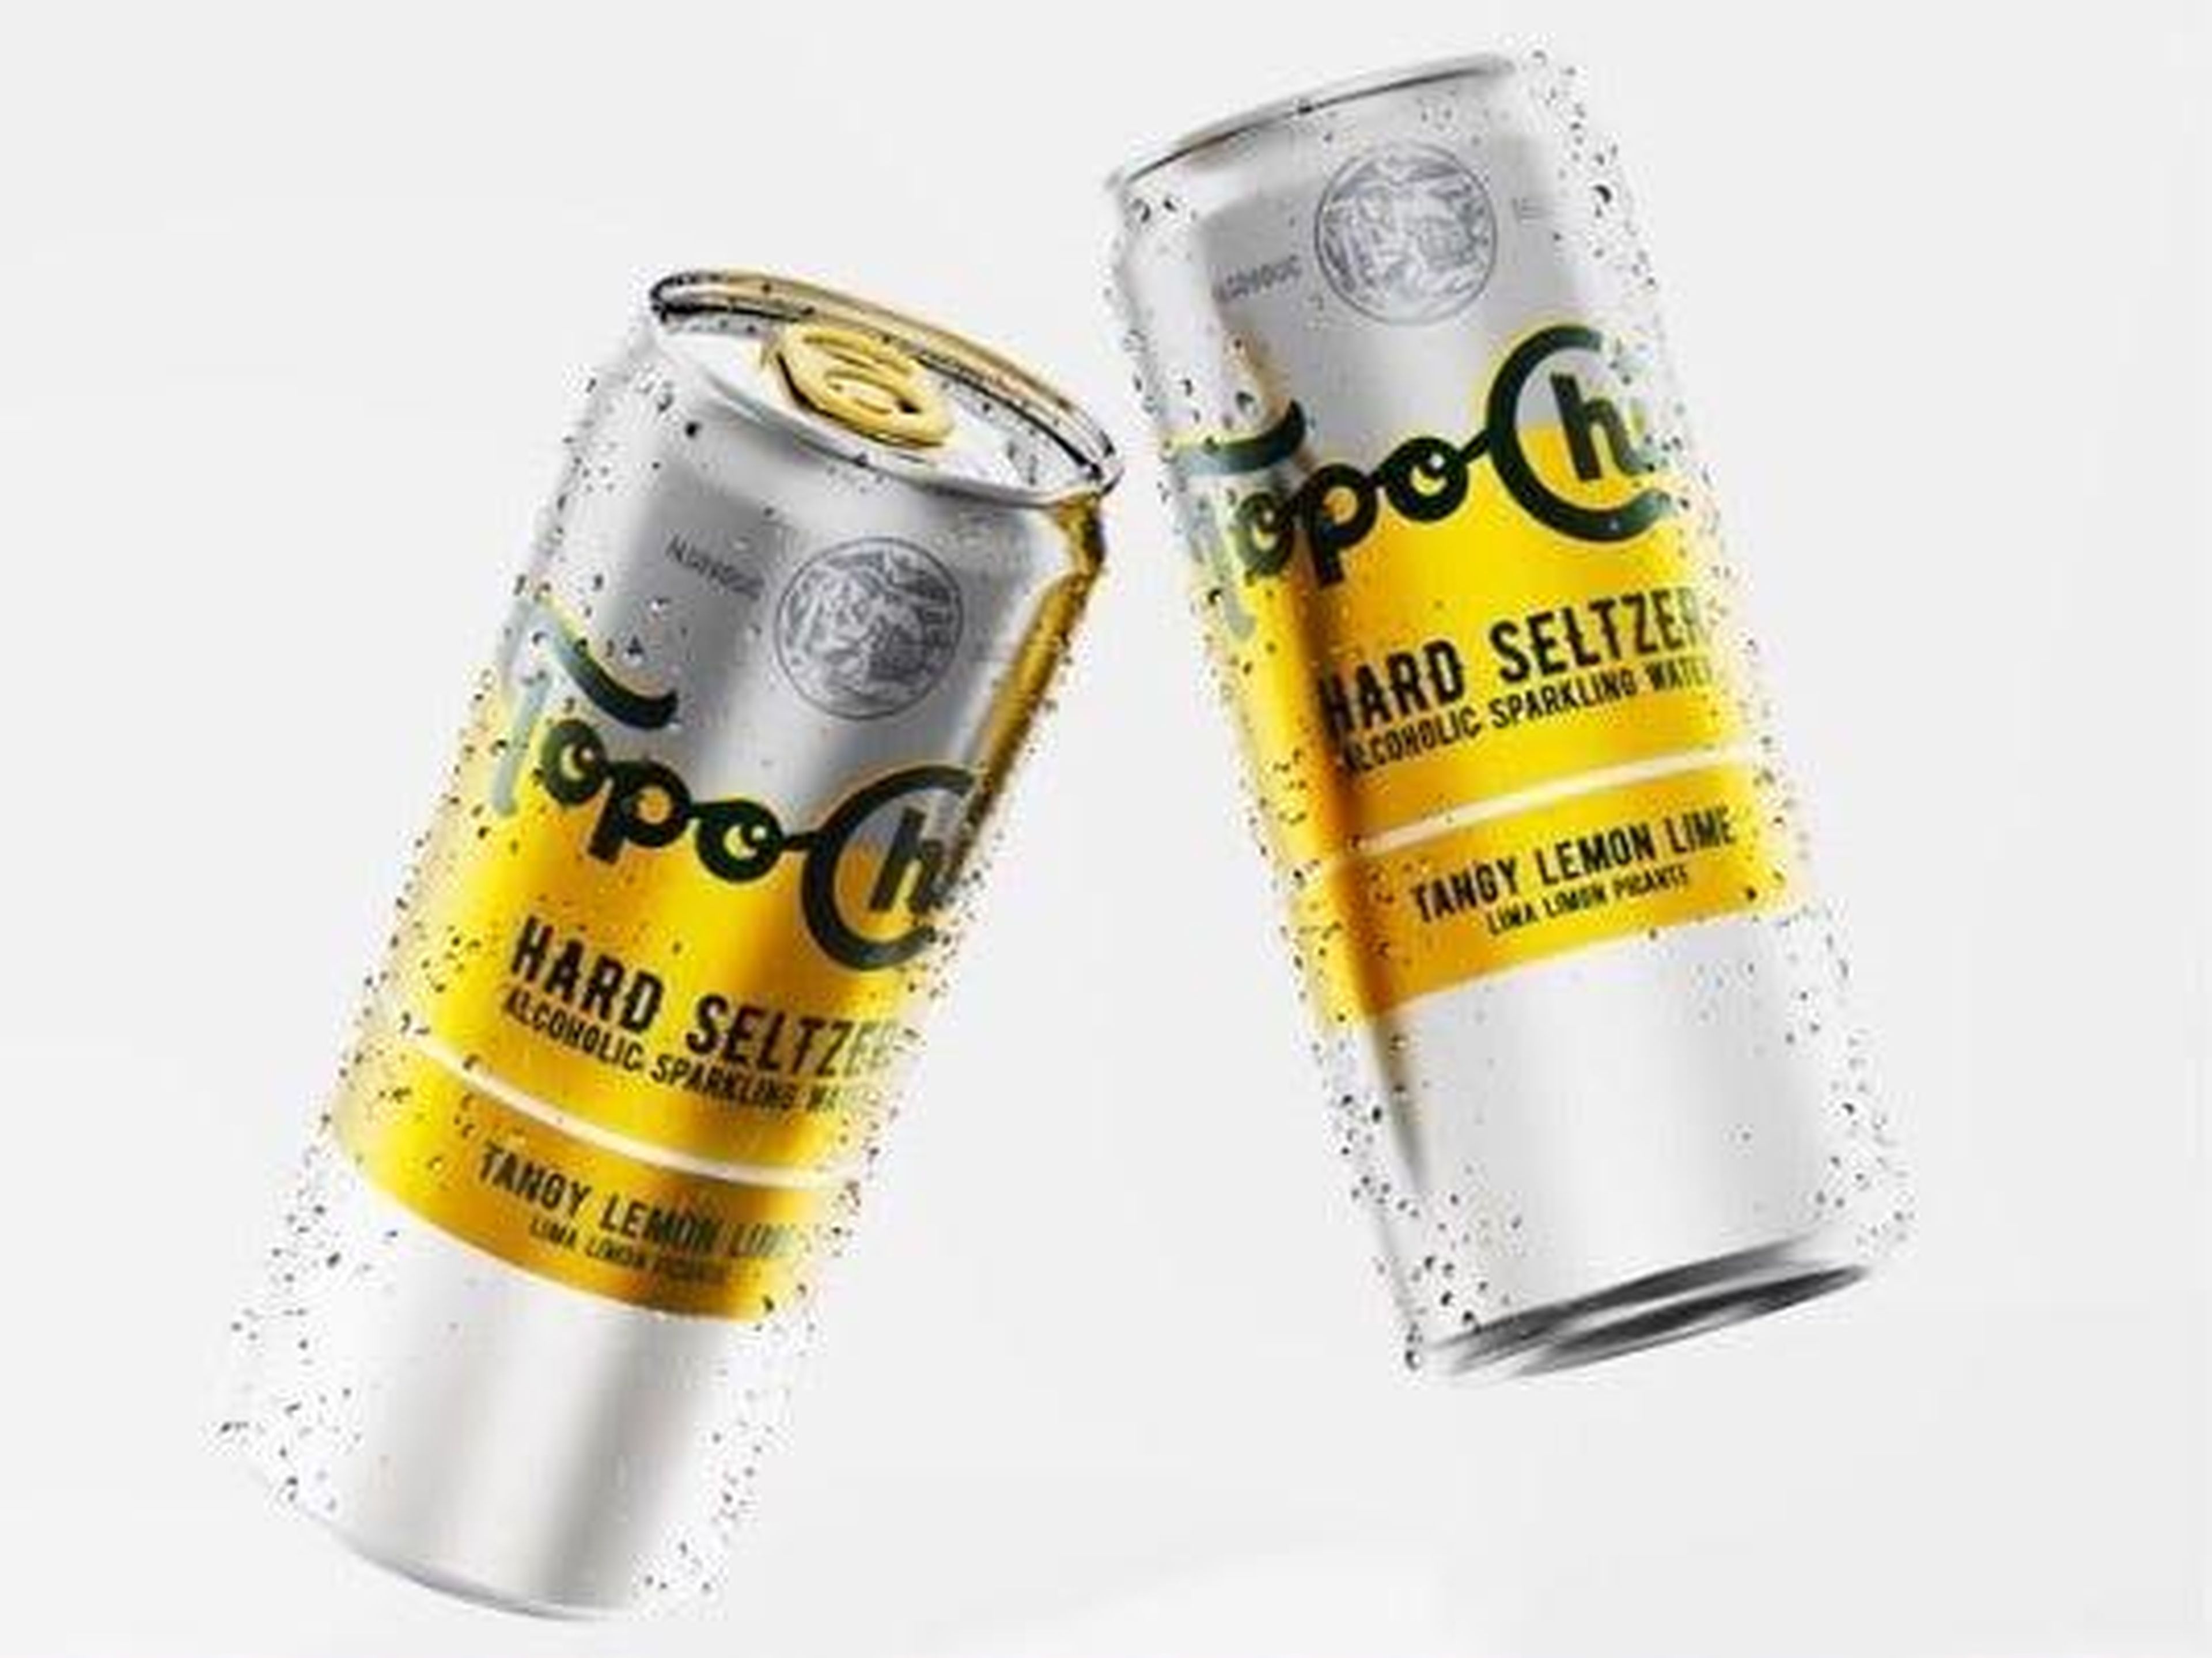 Coca-Cola is getting into the hard seltzer game